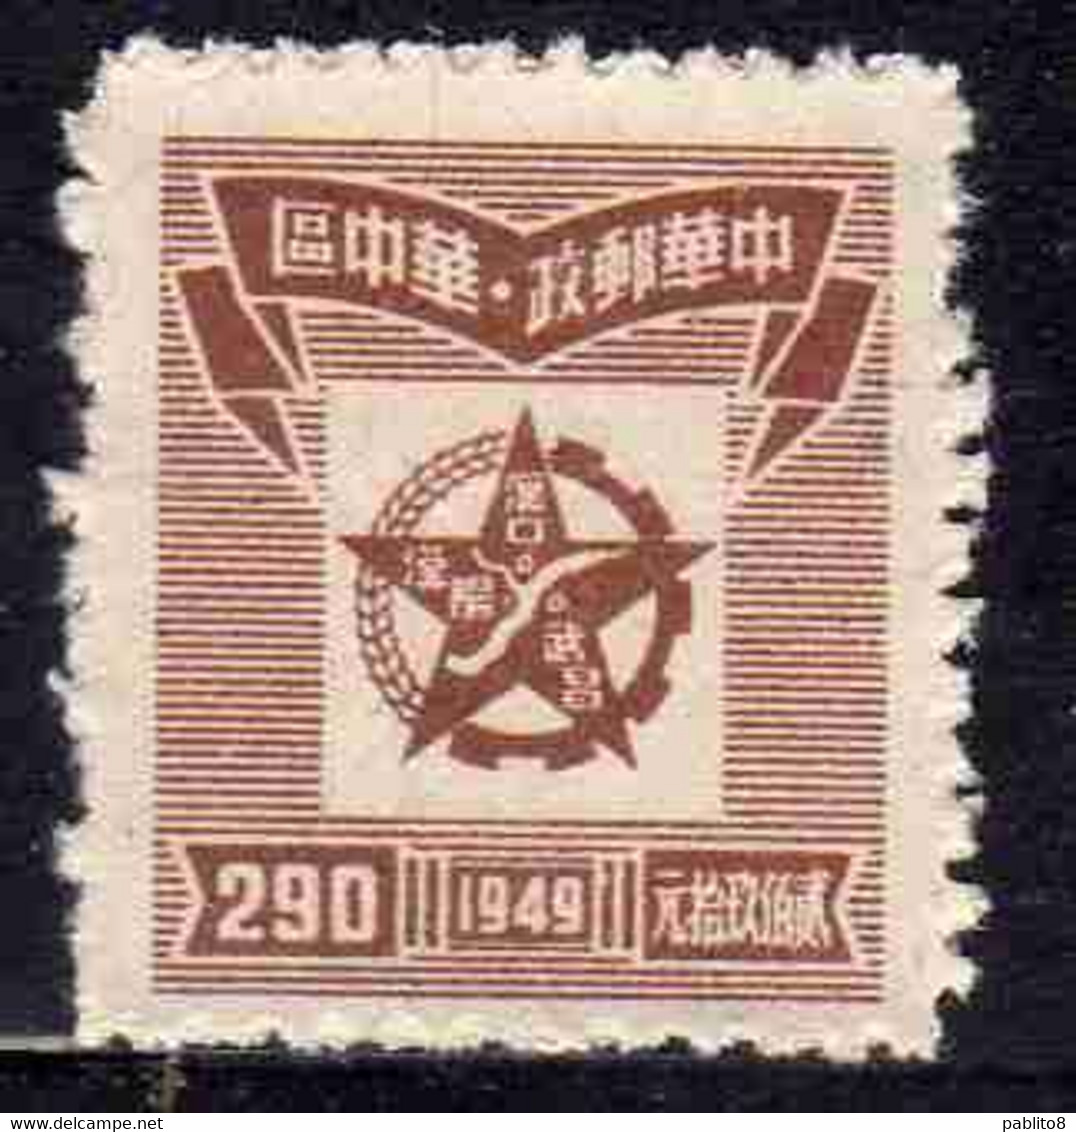 CENTRAL CHINA CINA CENTRALE 1949 Posts And Telegraph ADMINISTRATION Star Enclosing Map Of Hankow Area 290$ NG - Zentralchina 1948-49